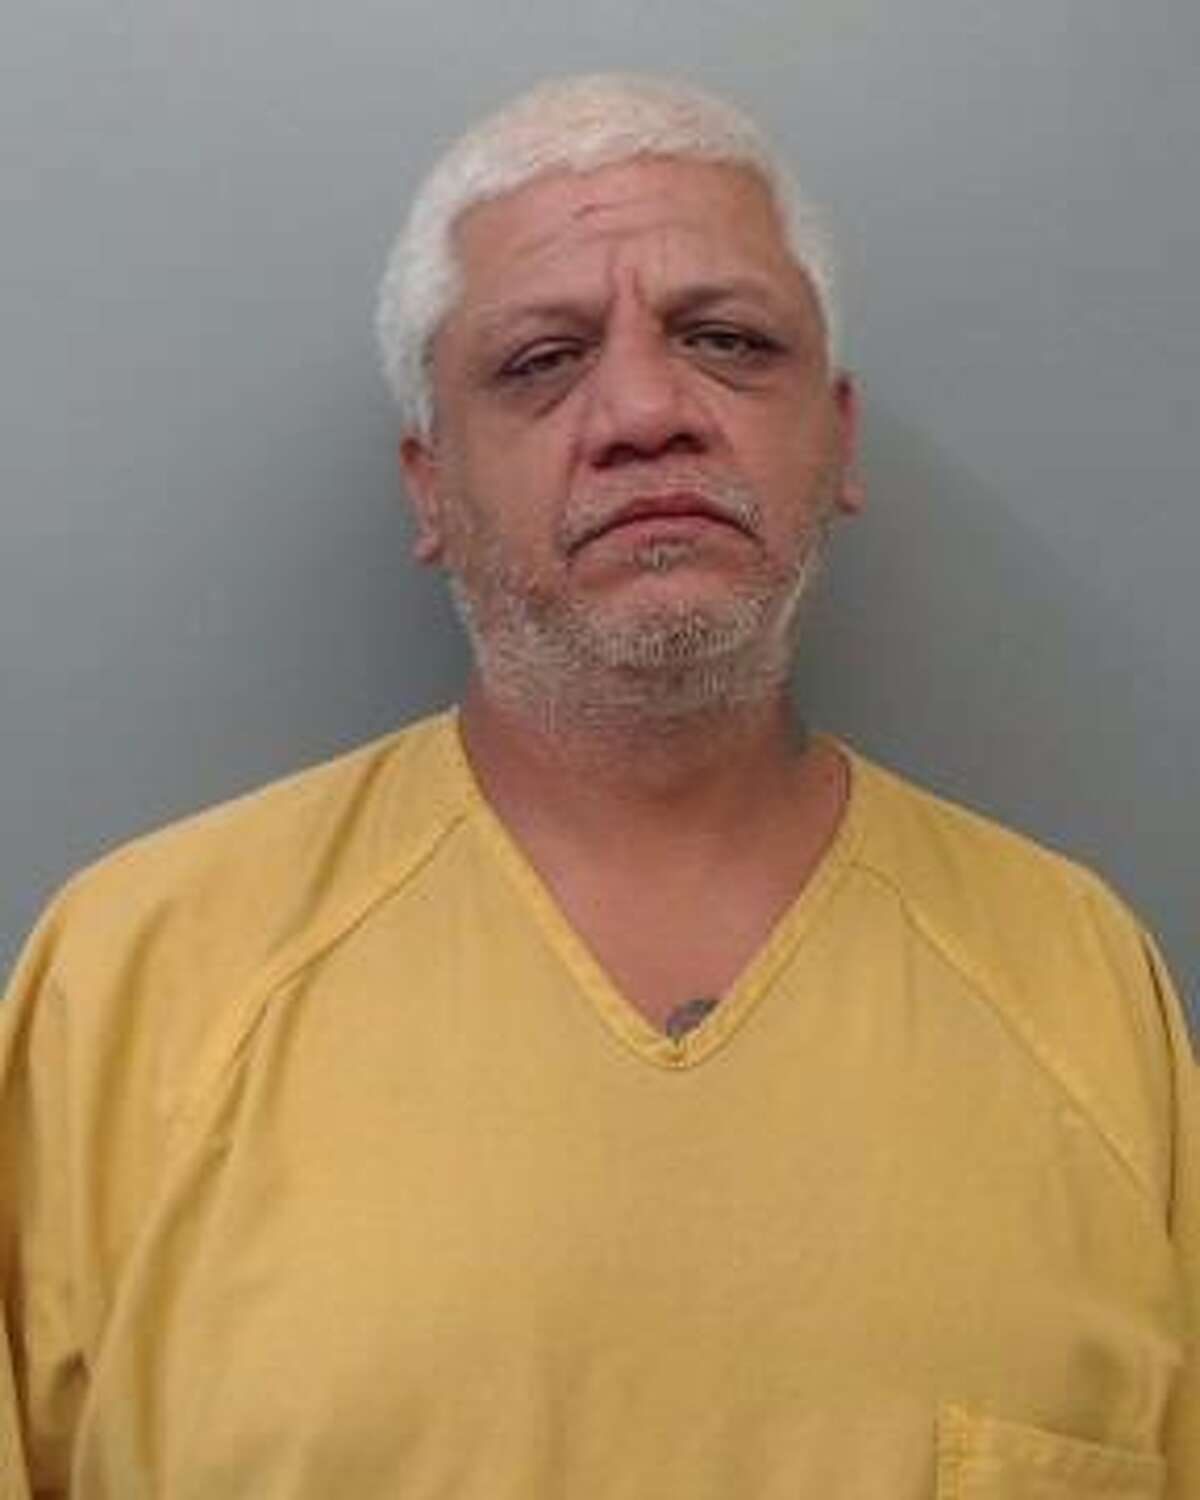 Juan Rodriguez, 48, was arrested after he was served with a warrant charging him with burglary of a habitation.